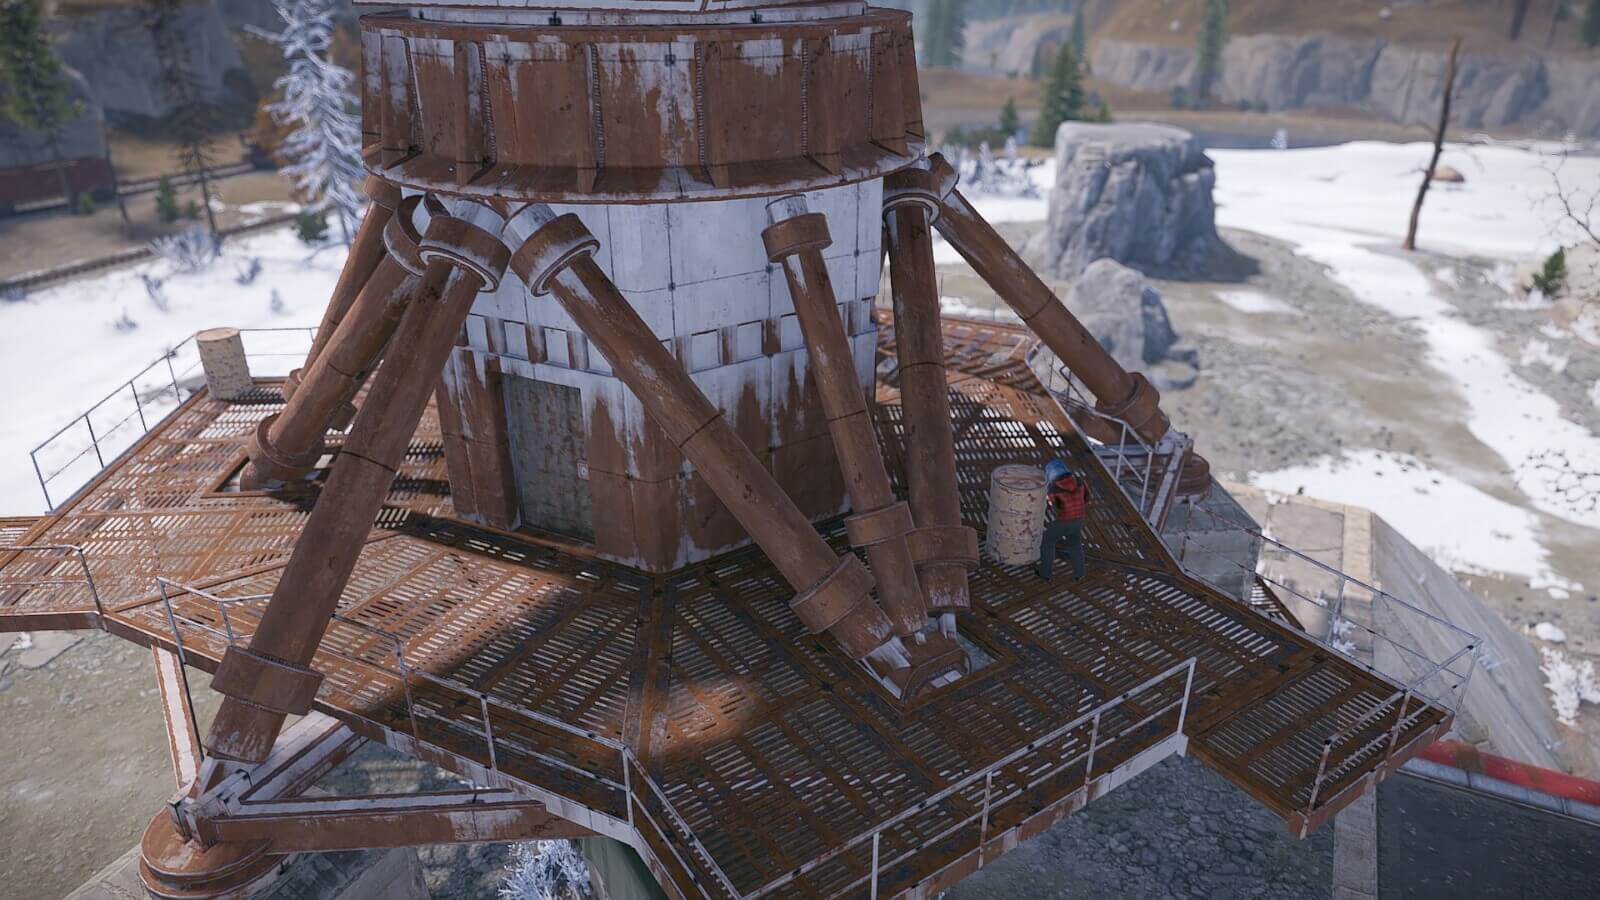 Scattered amongst the satellite dishes you'll find several regular barrels along with a crate spawn or two.